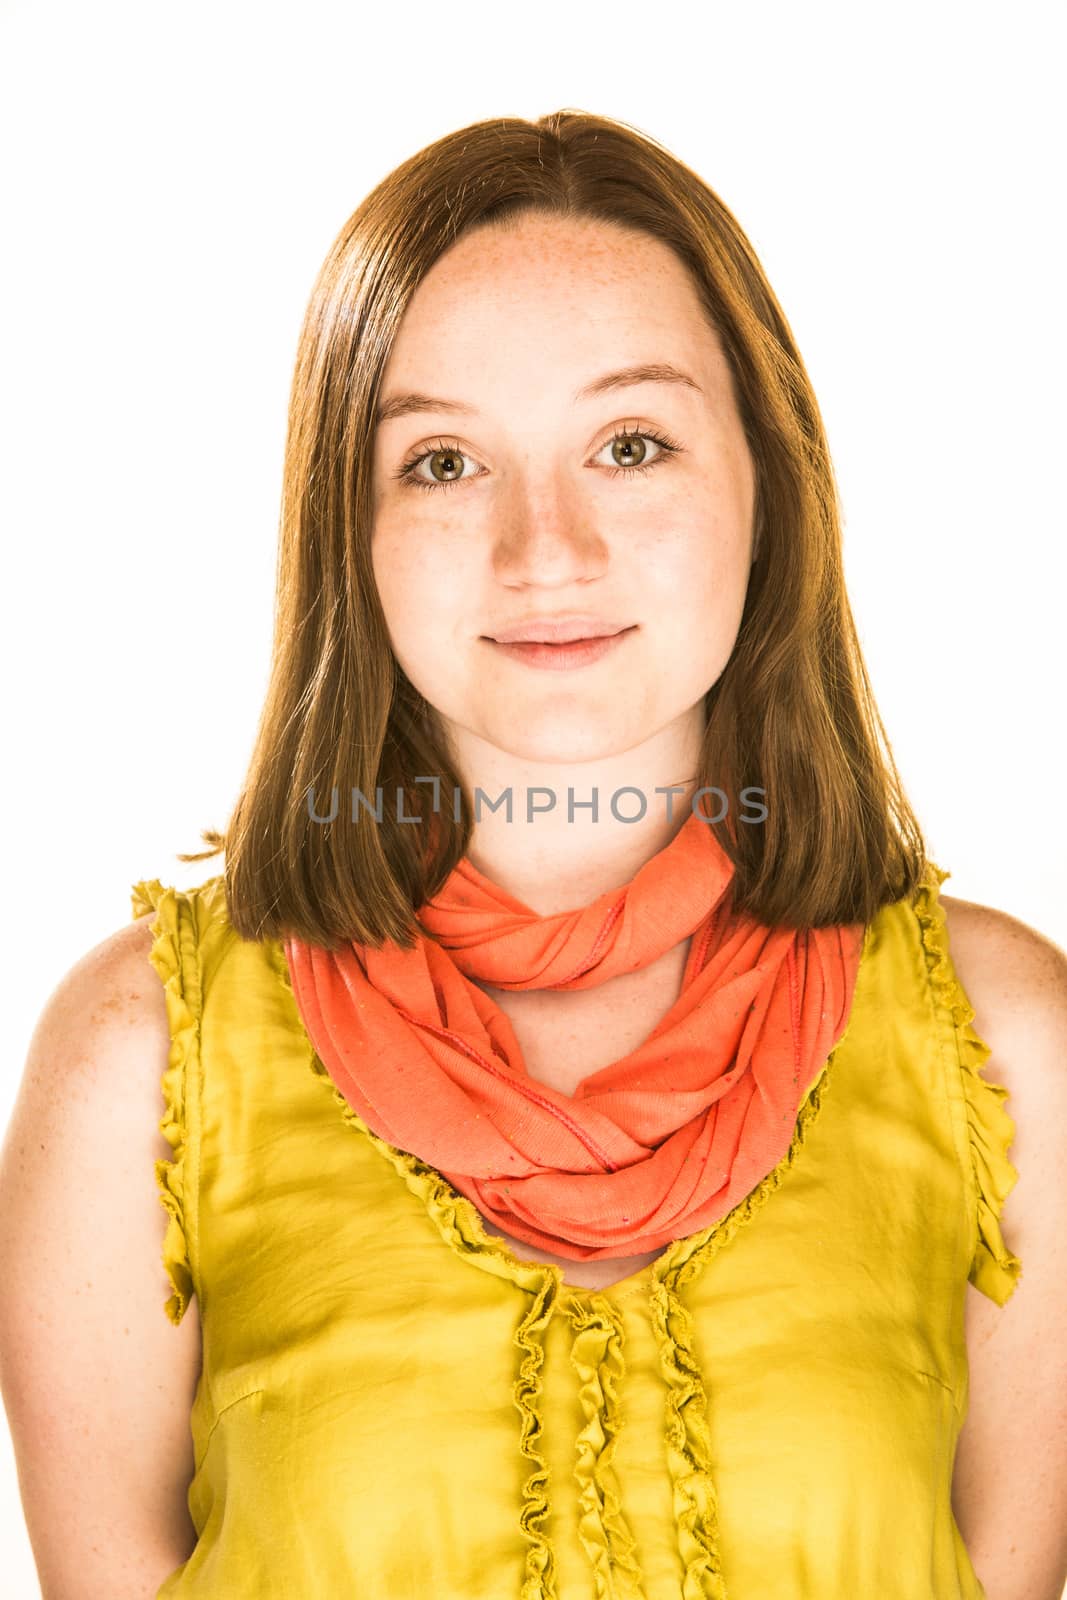 Pretty girl with a kind expression on white background